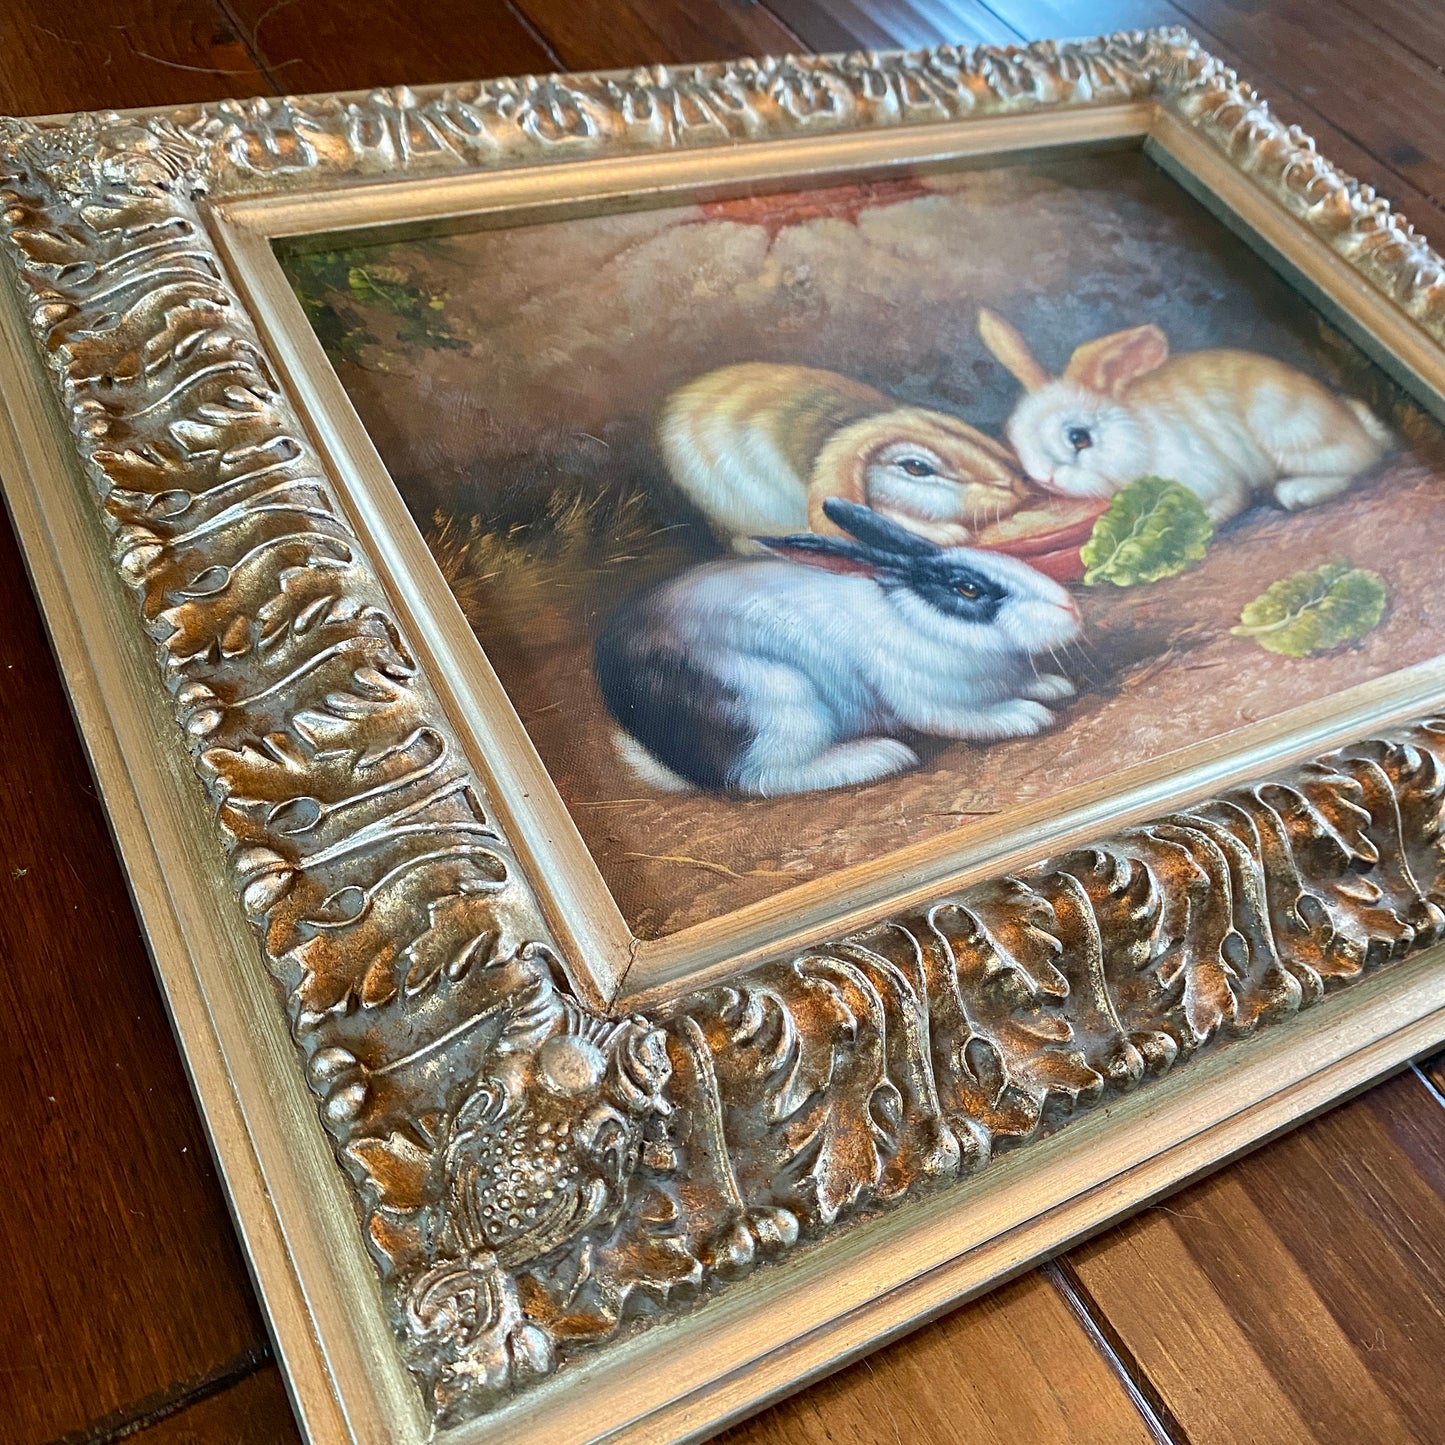 Original Trio of Bunnies Painting with Silver Frame